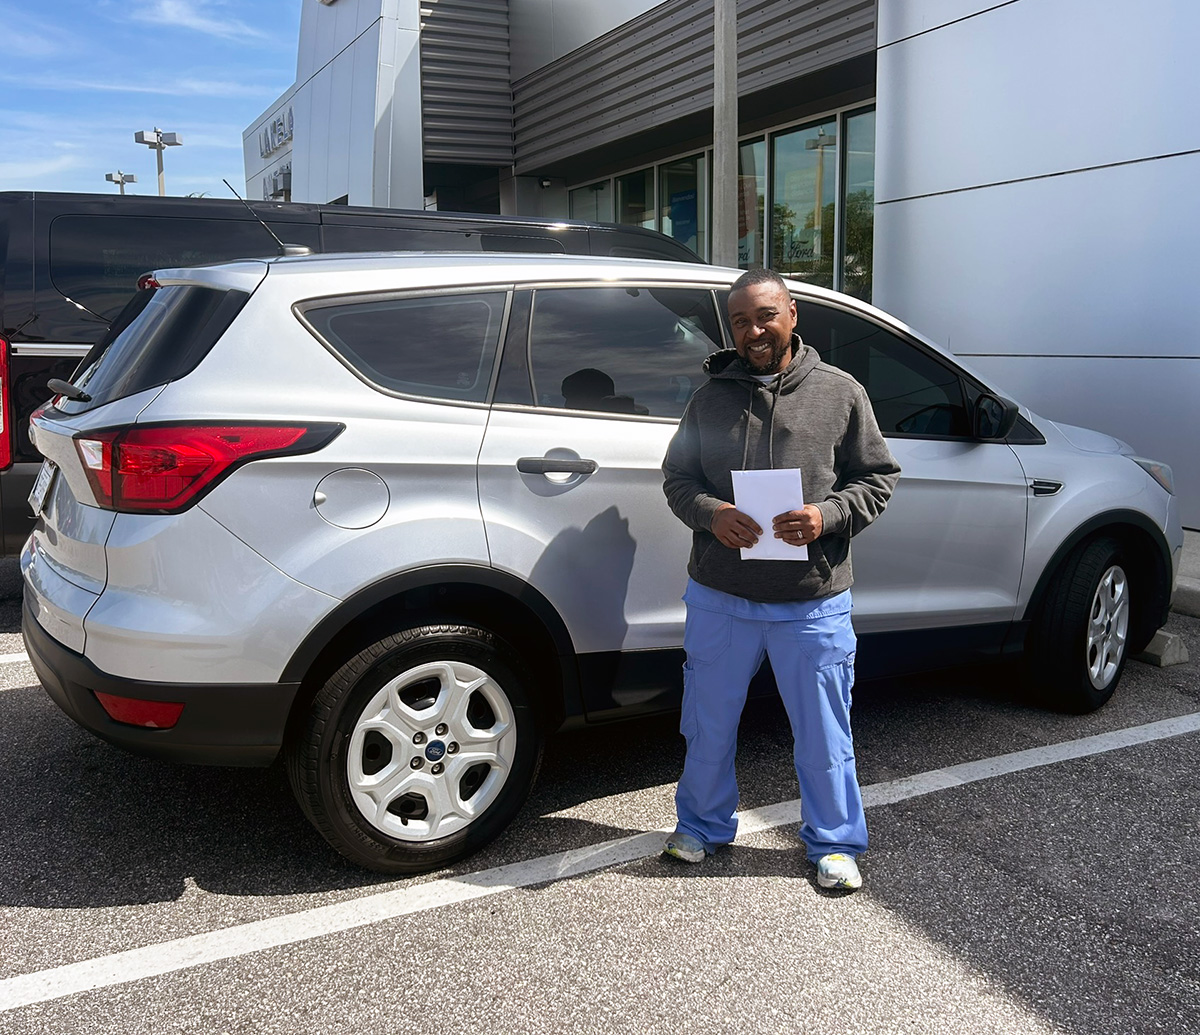 We must be doing something right when Dominic Wint said 'Amazing!' He was talking about his experience with salesperson #FrankUia when he came to #LakelandAutomall for the #FordEscape - #VeryNice Dominic & #ThankYou for choosing us - we're here for you! #NewSUV #FordFamily